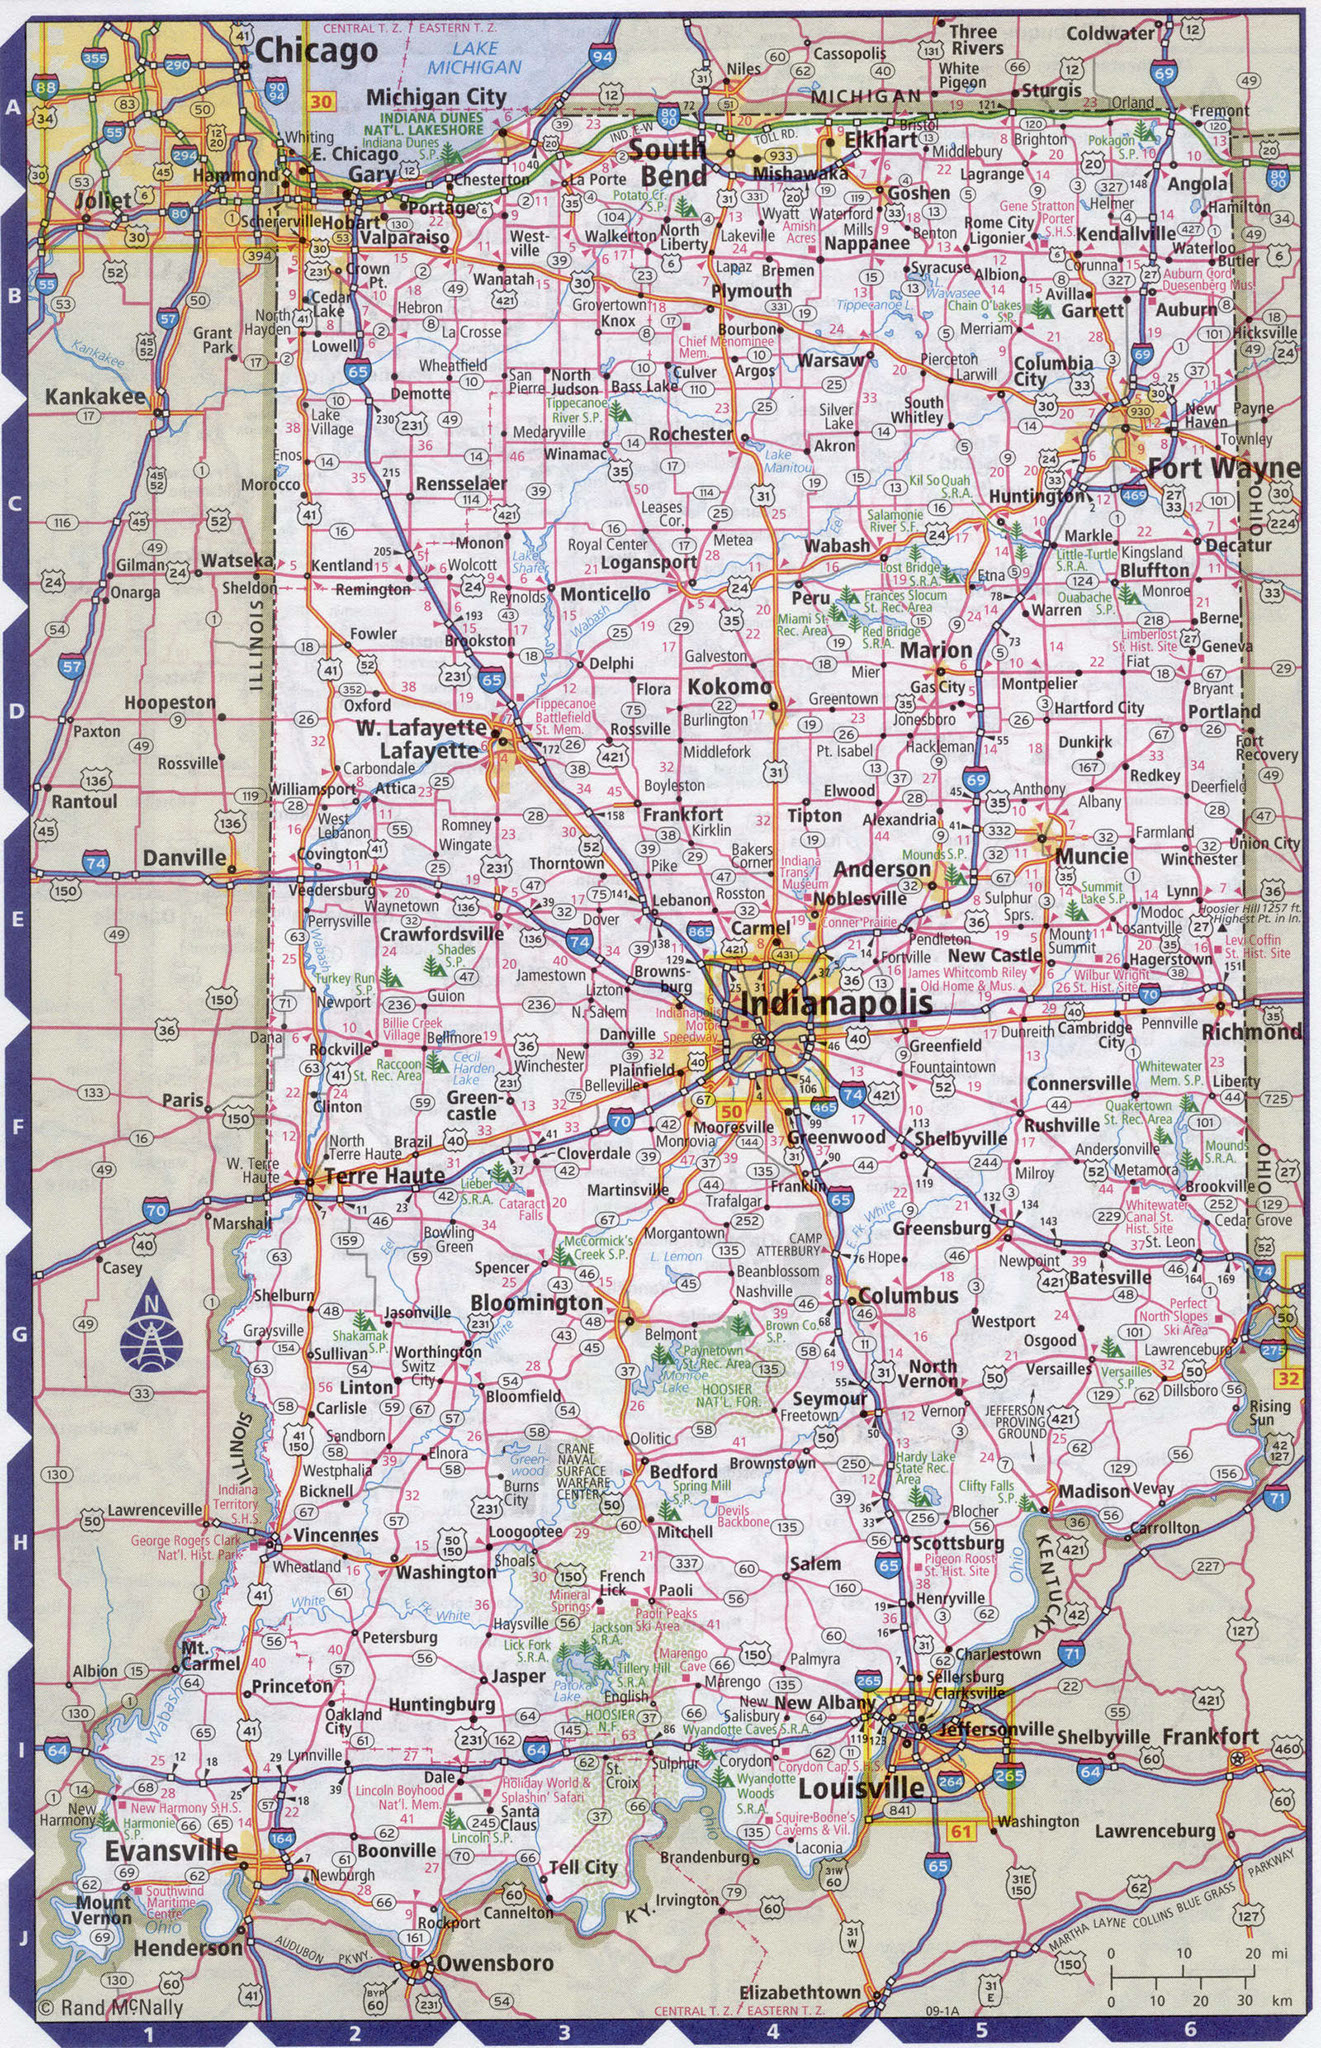 Indiana state complete map